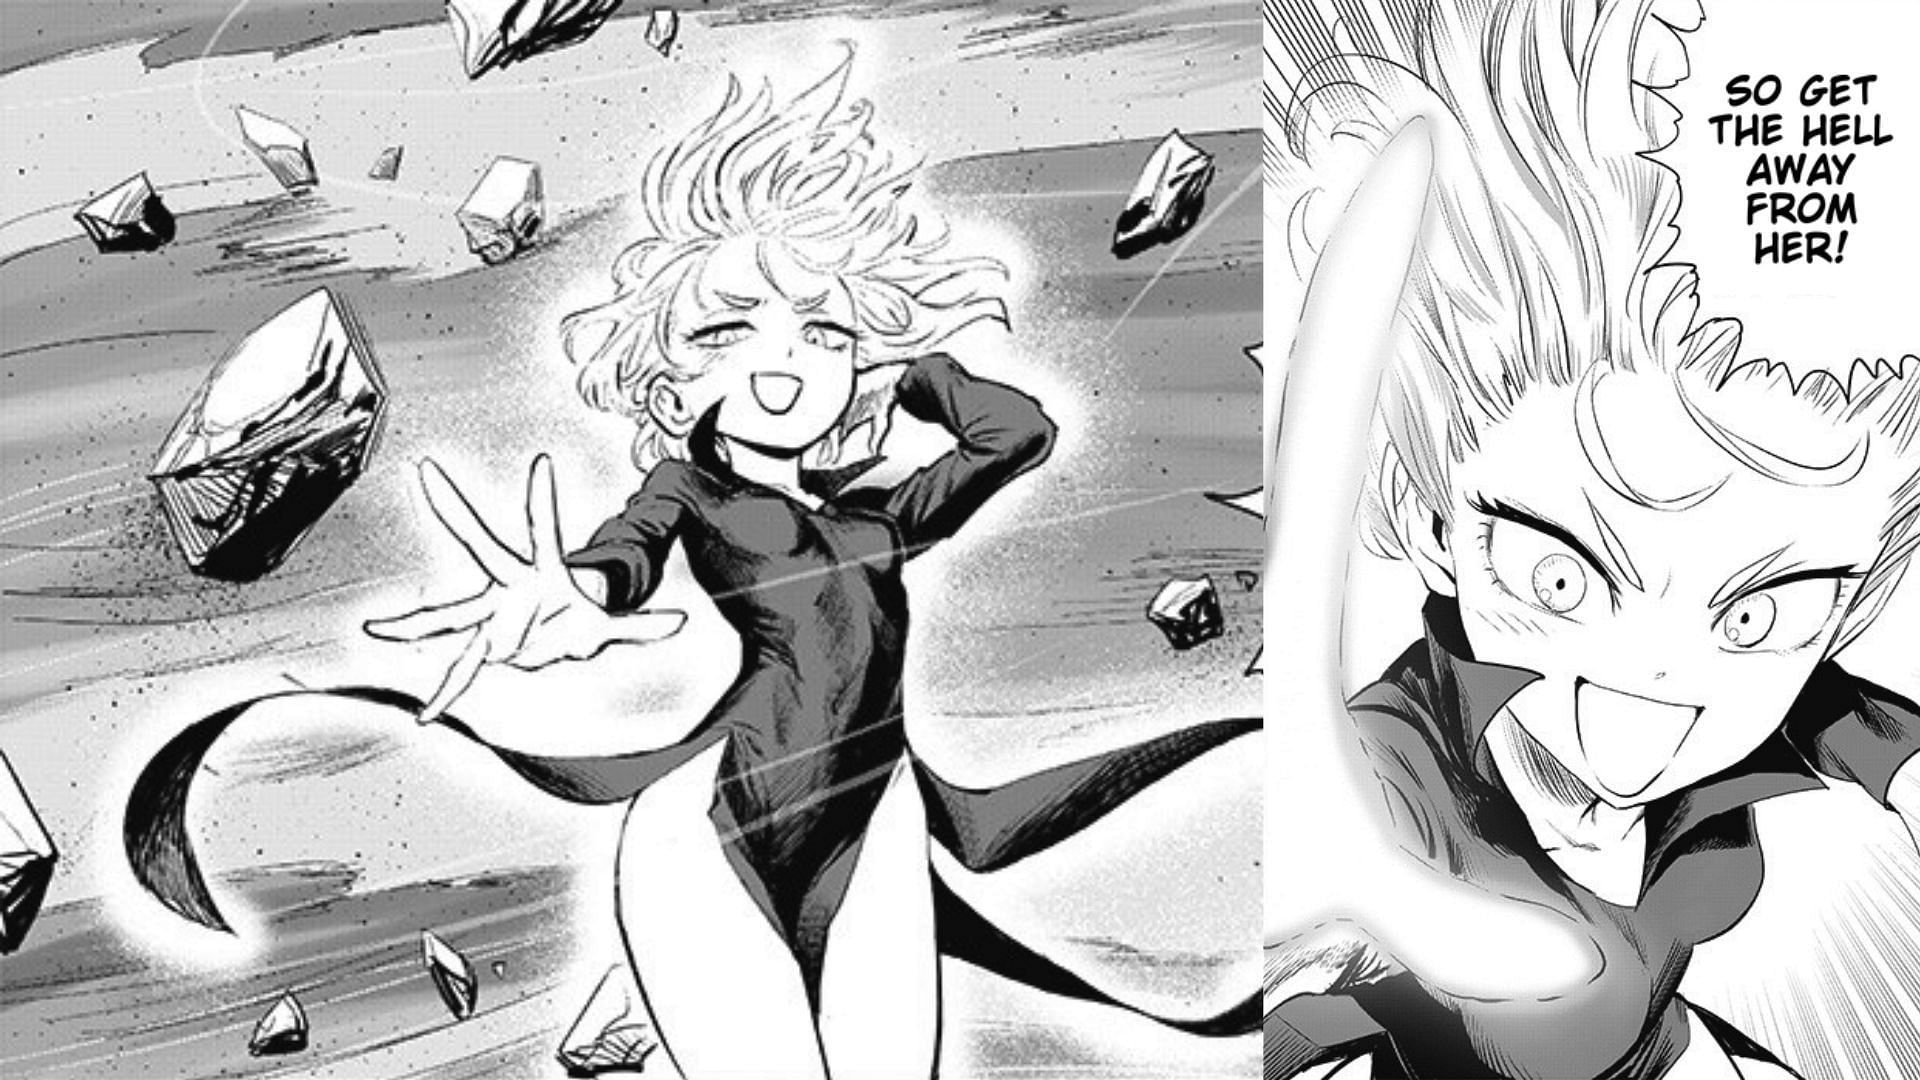 One Punch Man - Capítulo 179